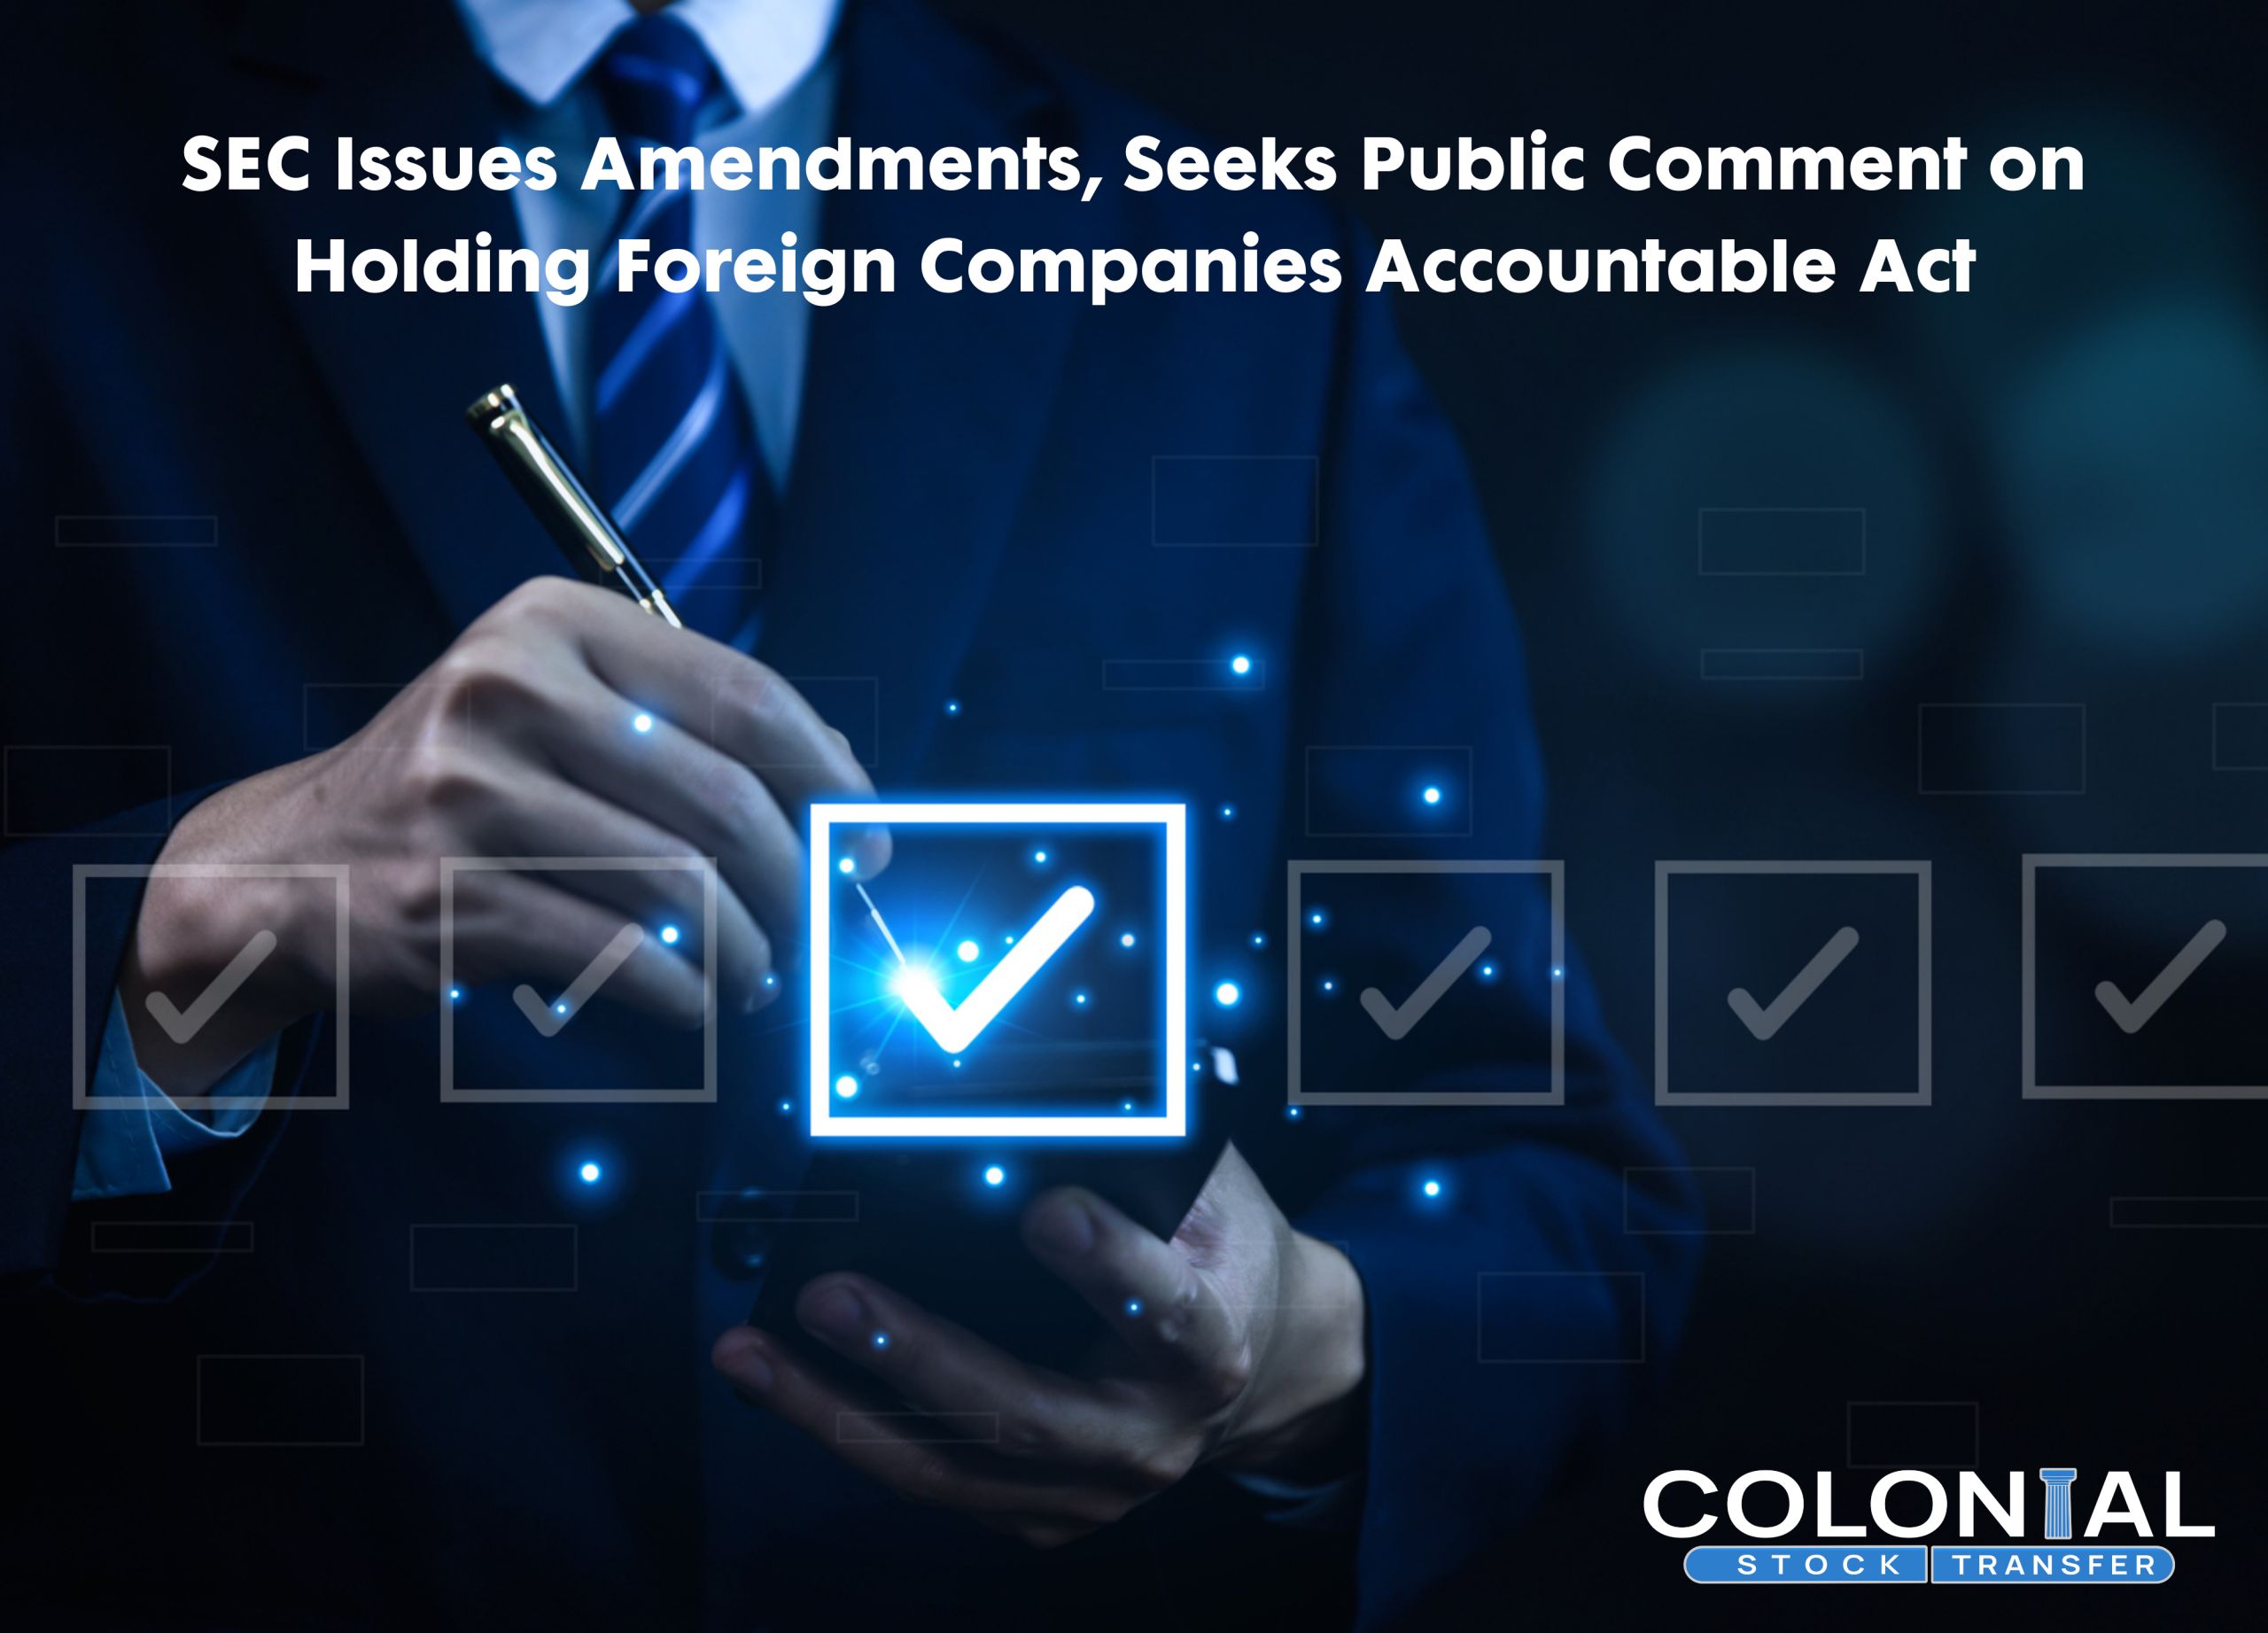 SEC Issues Amendments, Seeks Public Comment on Holding Foreign Companies Accountable Act